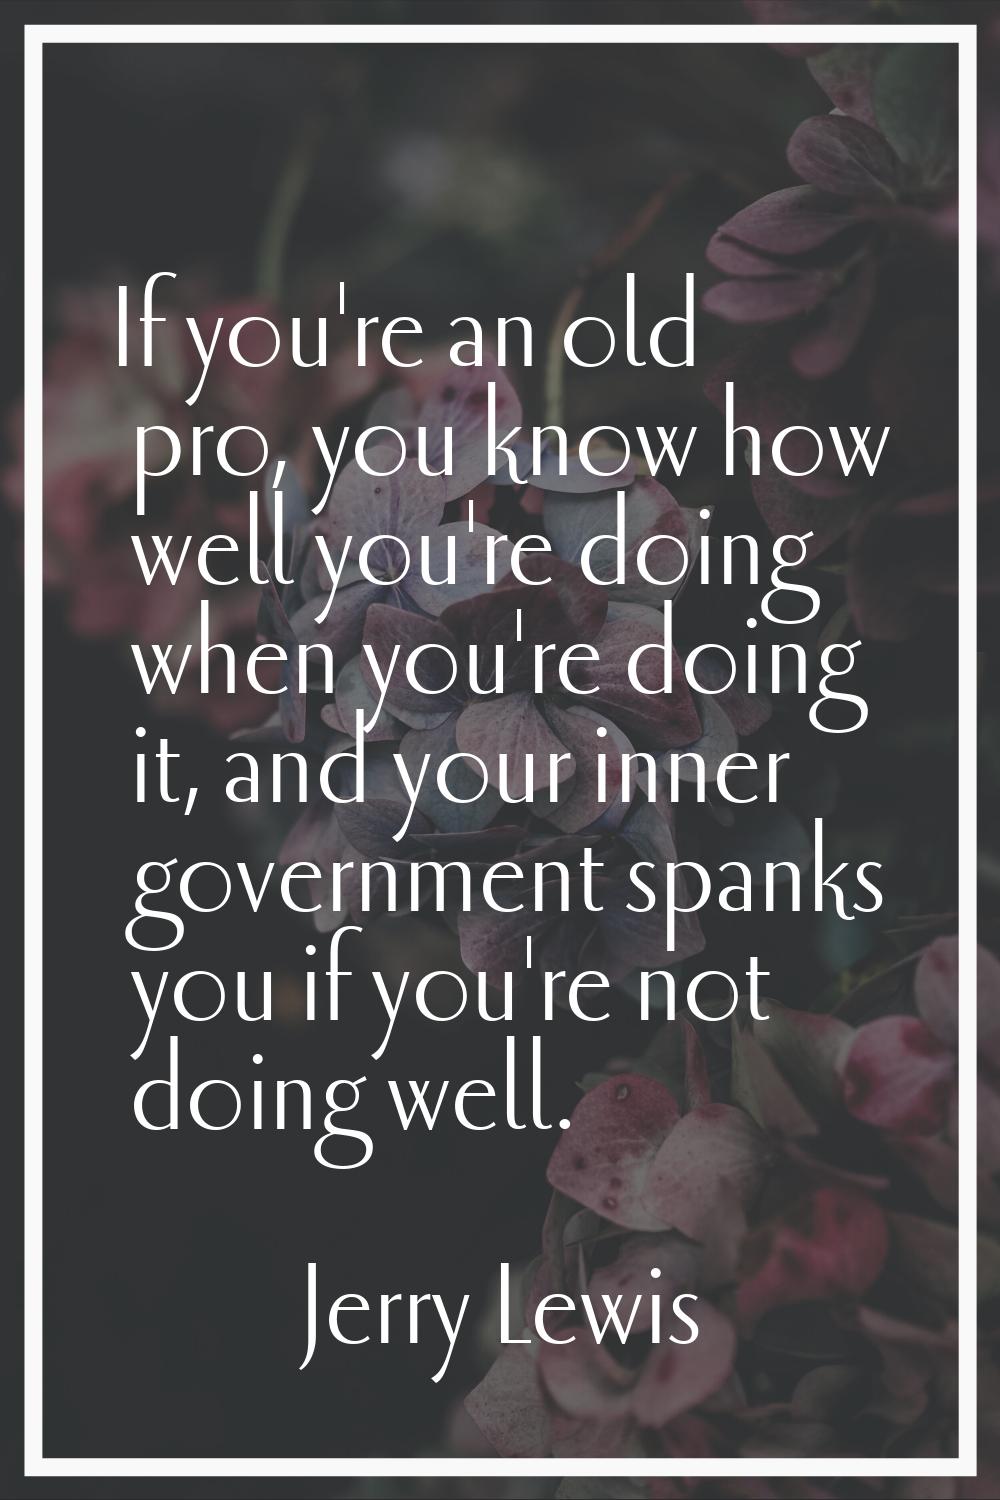 If you're an old pro, you know how well you're doing when you're doing it, and your inner governmen